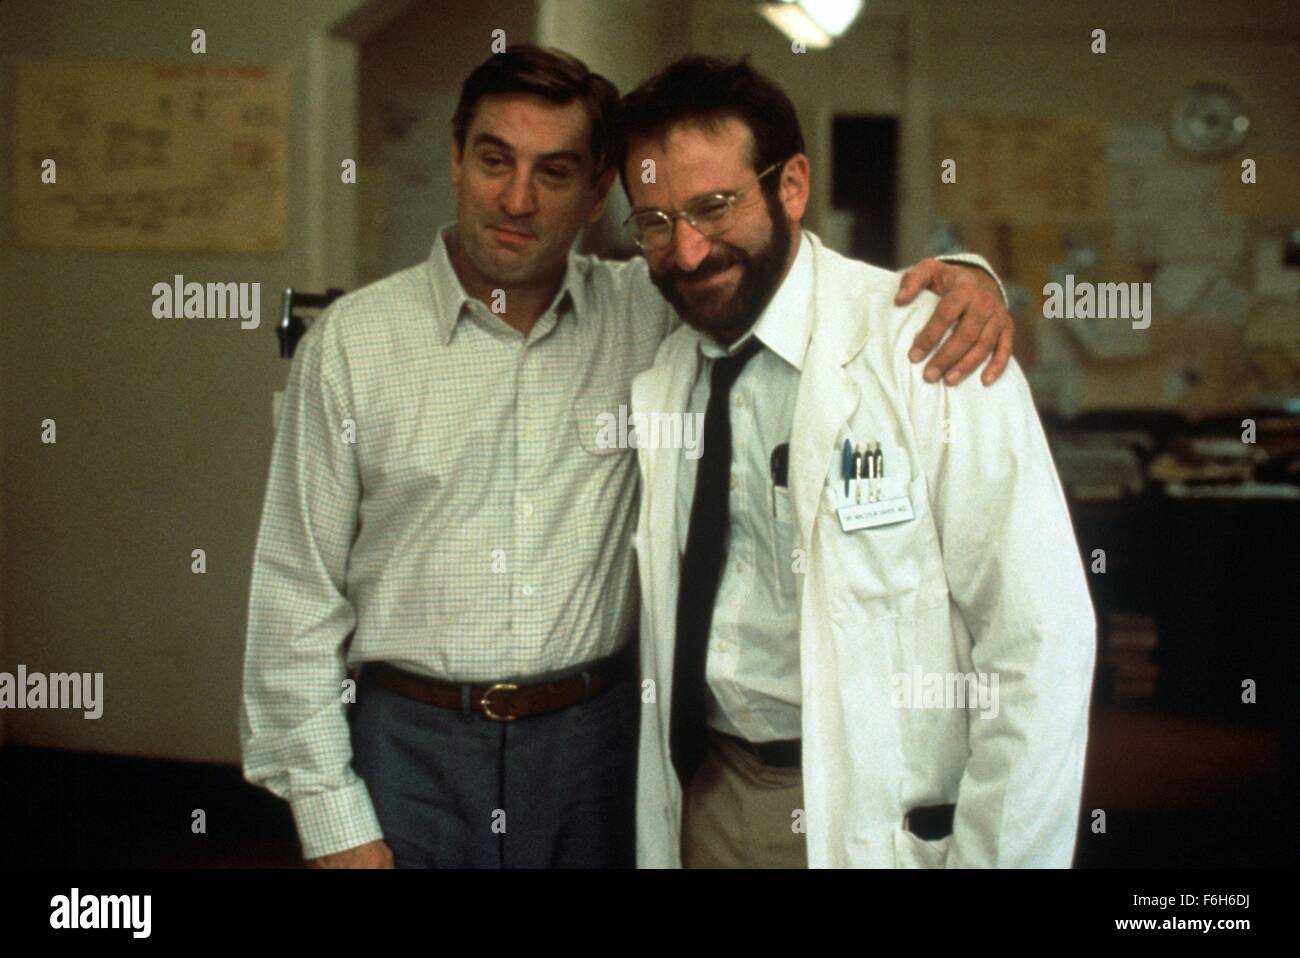 RELEASE DATE: December 20, 1990  MOVIE TITLE: Awakenings  STUDIO: Columbia Pictures Corporation  DIRECTOR: Penny Marshall  PLOT: A new doctor finds himself with a ward full of comatose patients. He is disturbed by them and the fact that they have been comatose for decades with no hope of any cure. When he finds a possible chemical cure he gets permission to try it on one of them. When the first patient awakes, he is now an adult having gone into a coma in his early teens. The film then delights in the new awareness of the patients and then on the reactions of their relatives to the changes in Stock Photo